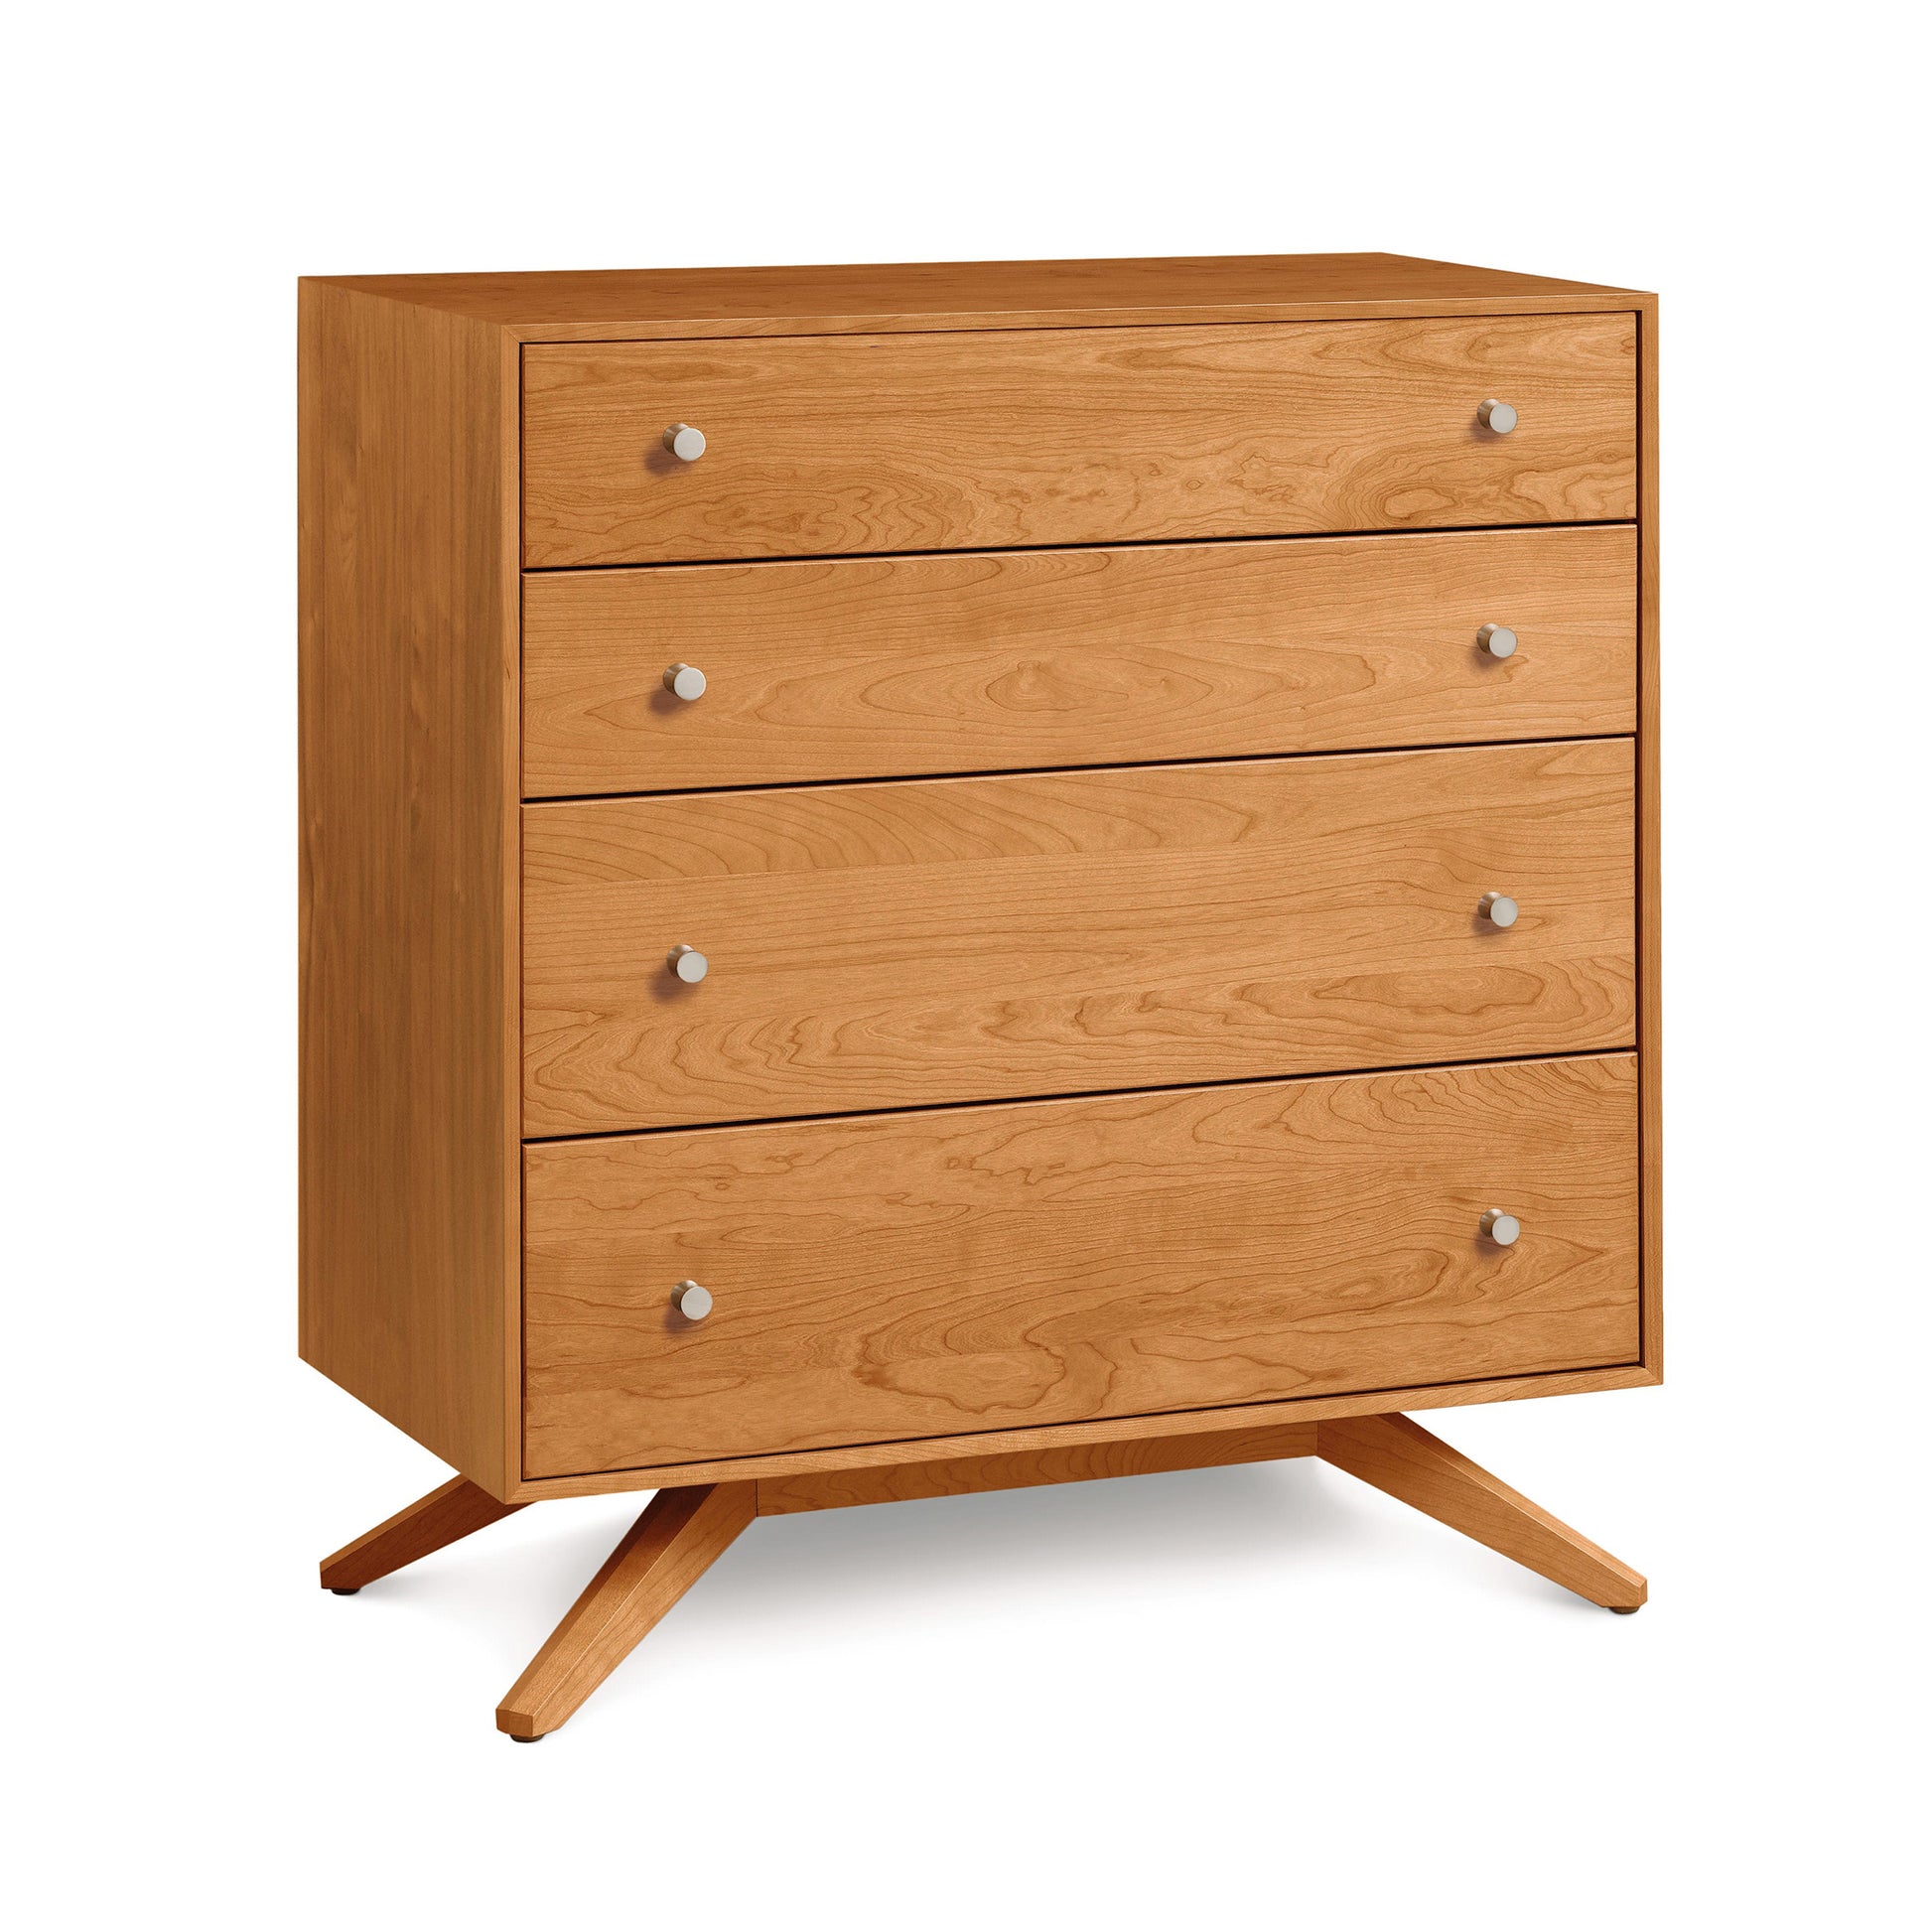 A hardwood Astrid 4-Drawer Chest from Copeland Furniture with a simple design and angled legs, isolated on a white background.